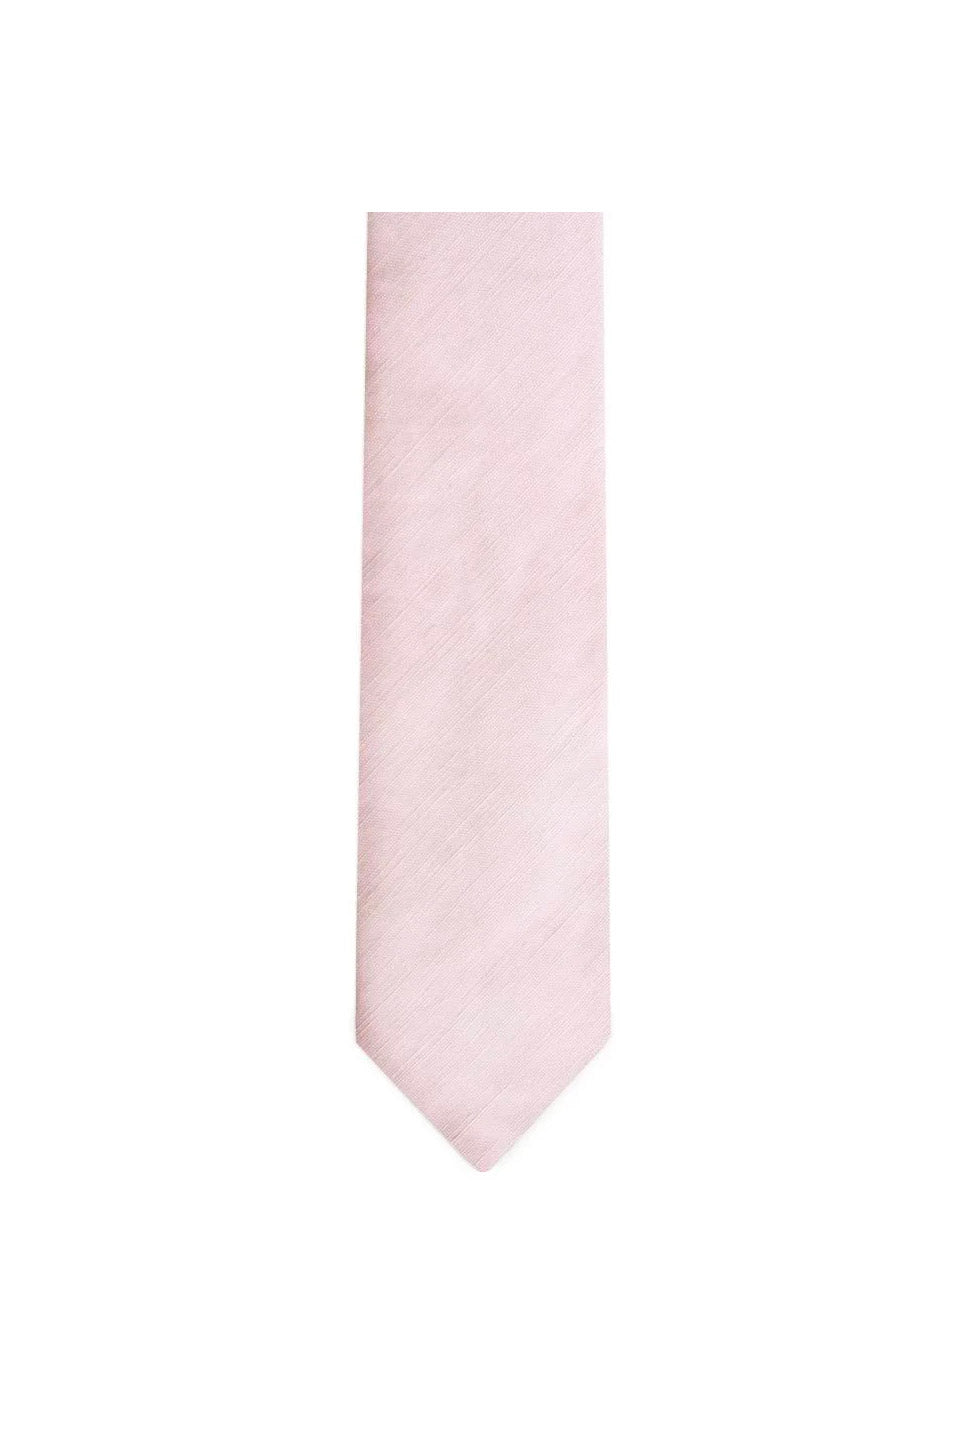 Pocket Square Clothing - The Peach Raspberry Linen Tie - Pink